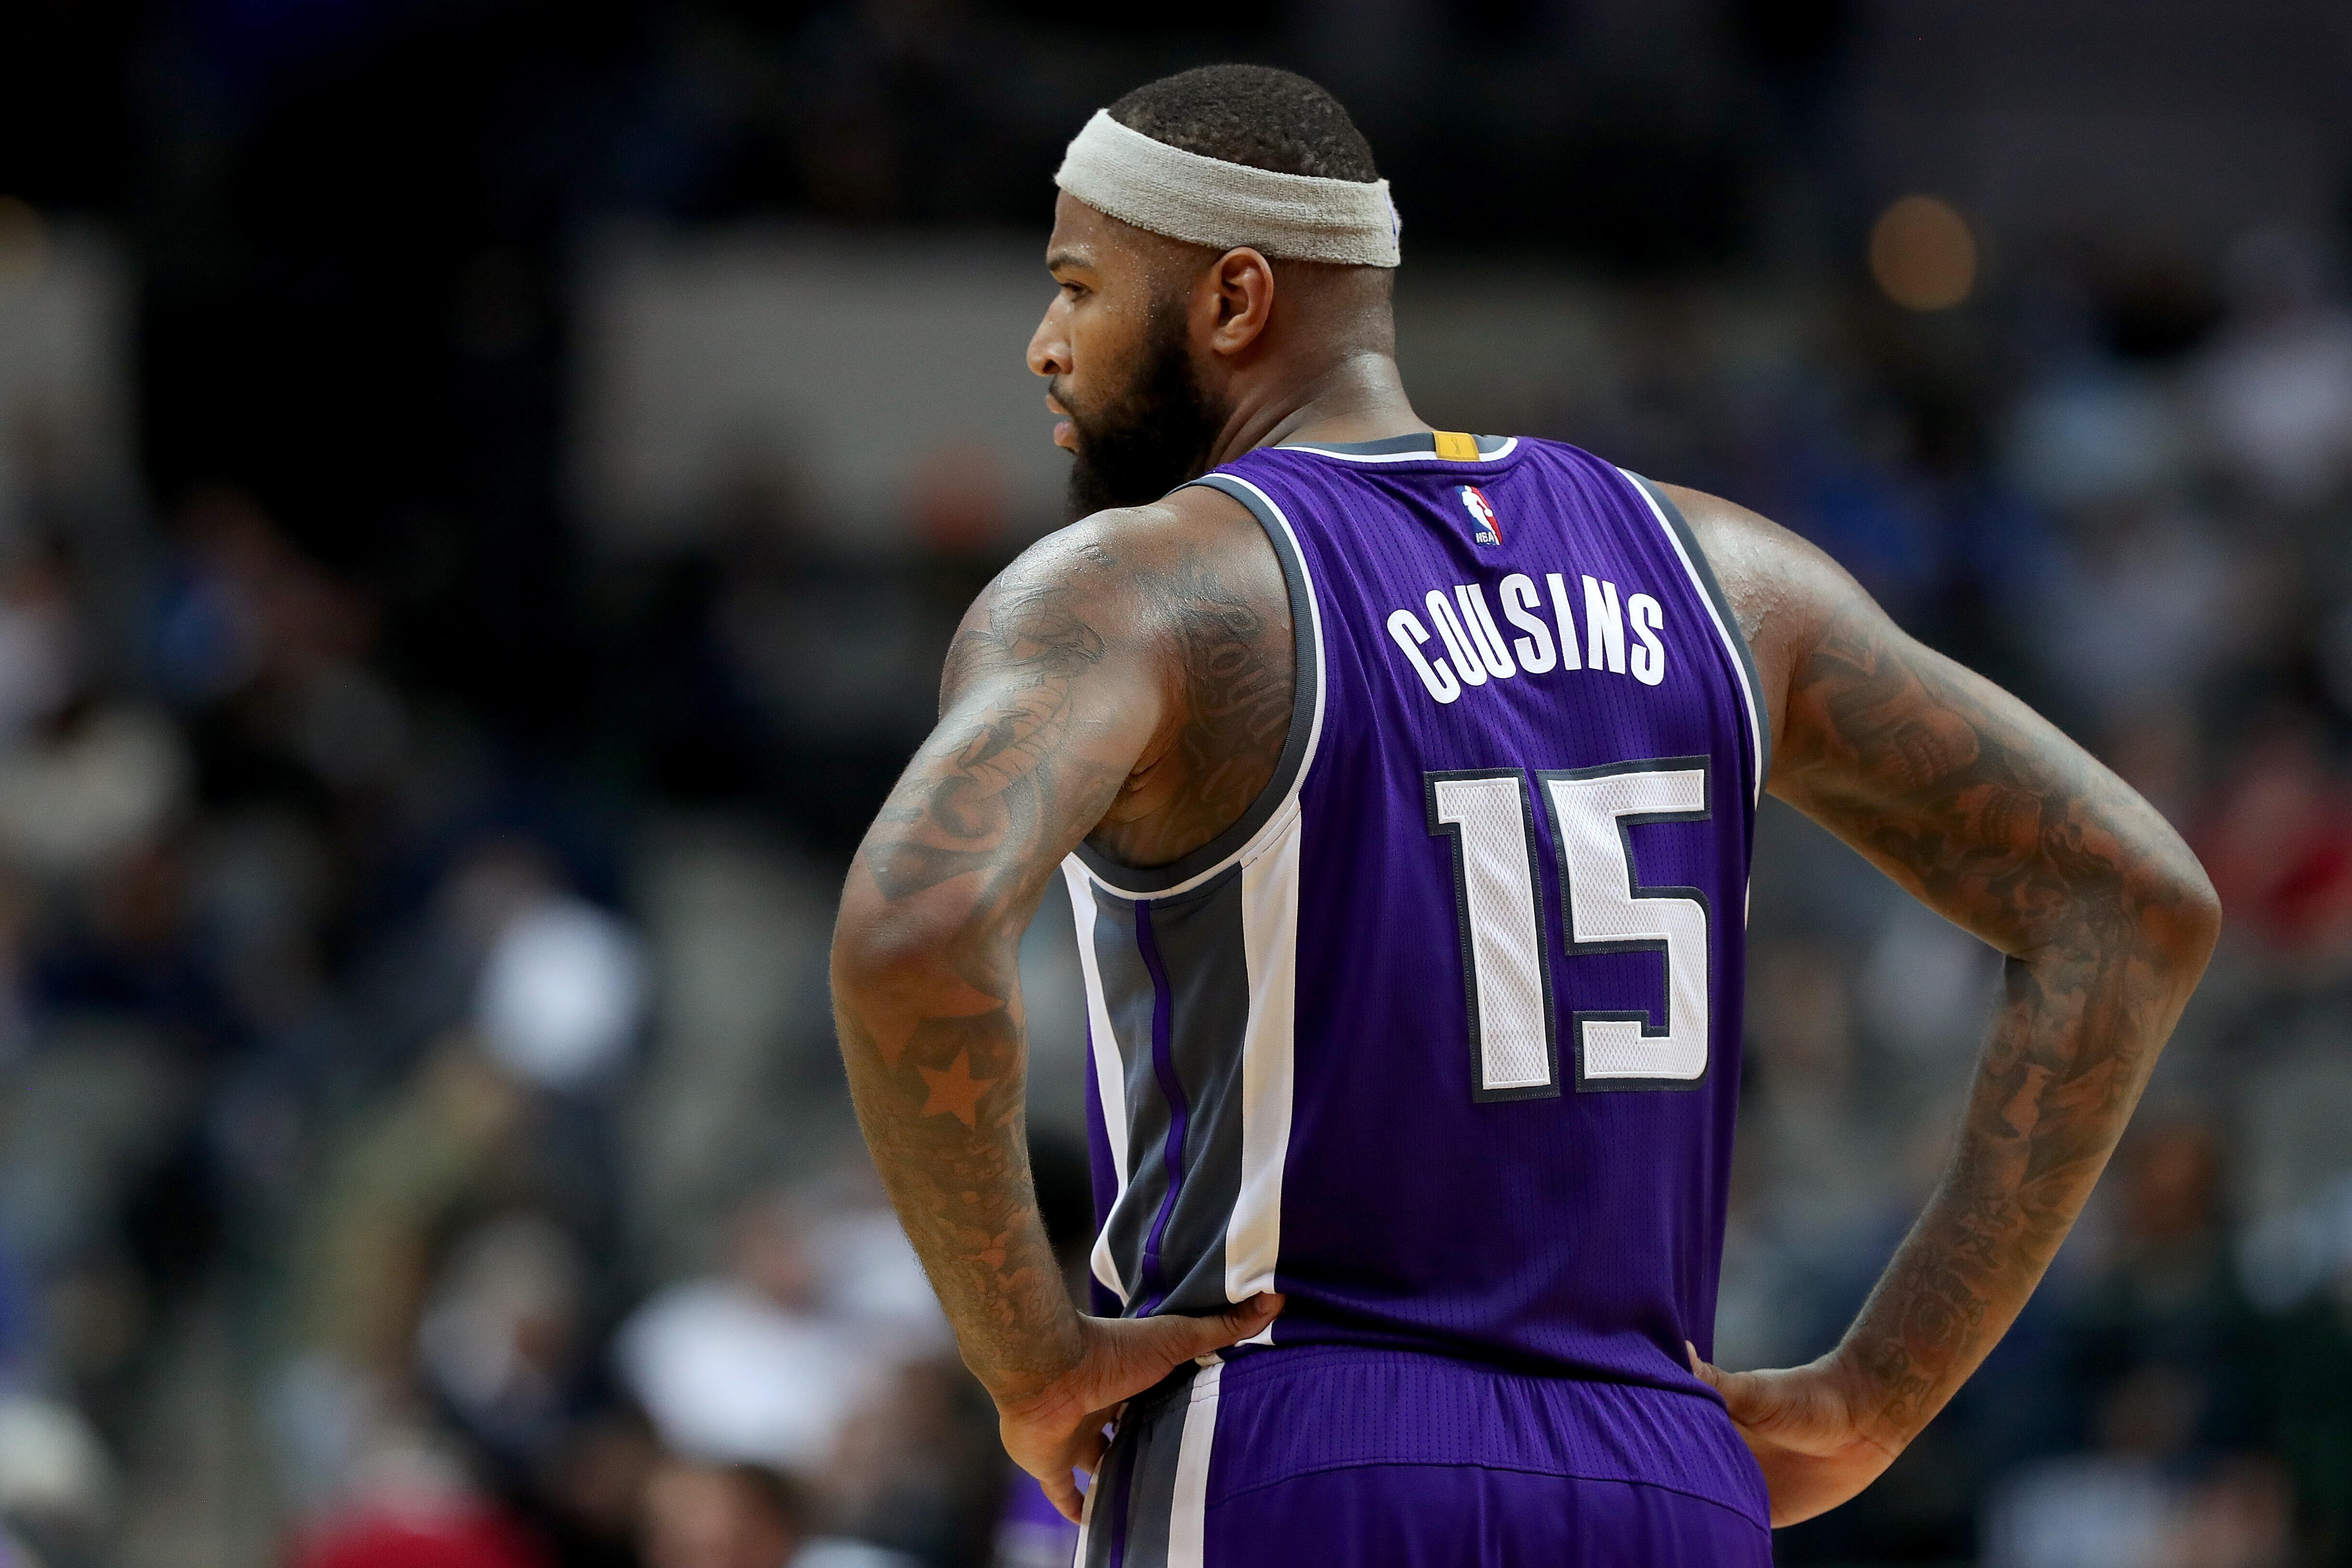 DALLAS, TX - DECEMBER 07:  DeMarcus Cousins #15 of the Sacramento Kings takes on the Dallas Mavericks in the second half at American Airlines Center on December 7, 2016 in Dallas, Texas. NOTE TO USER: User expressly acknowledges and agrees that, by downlo